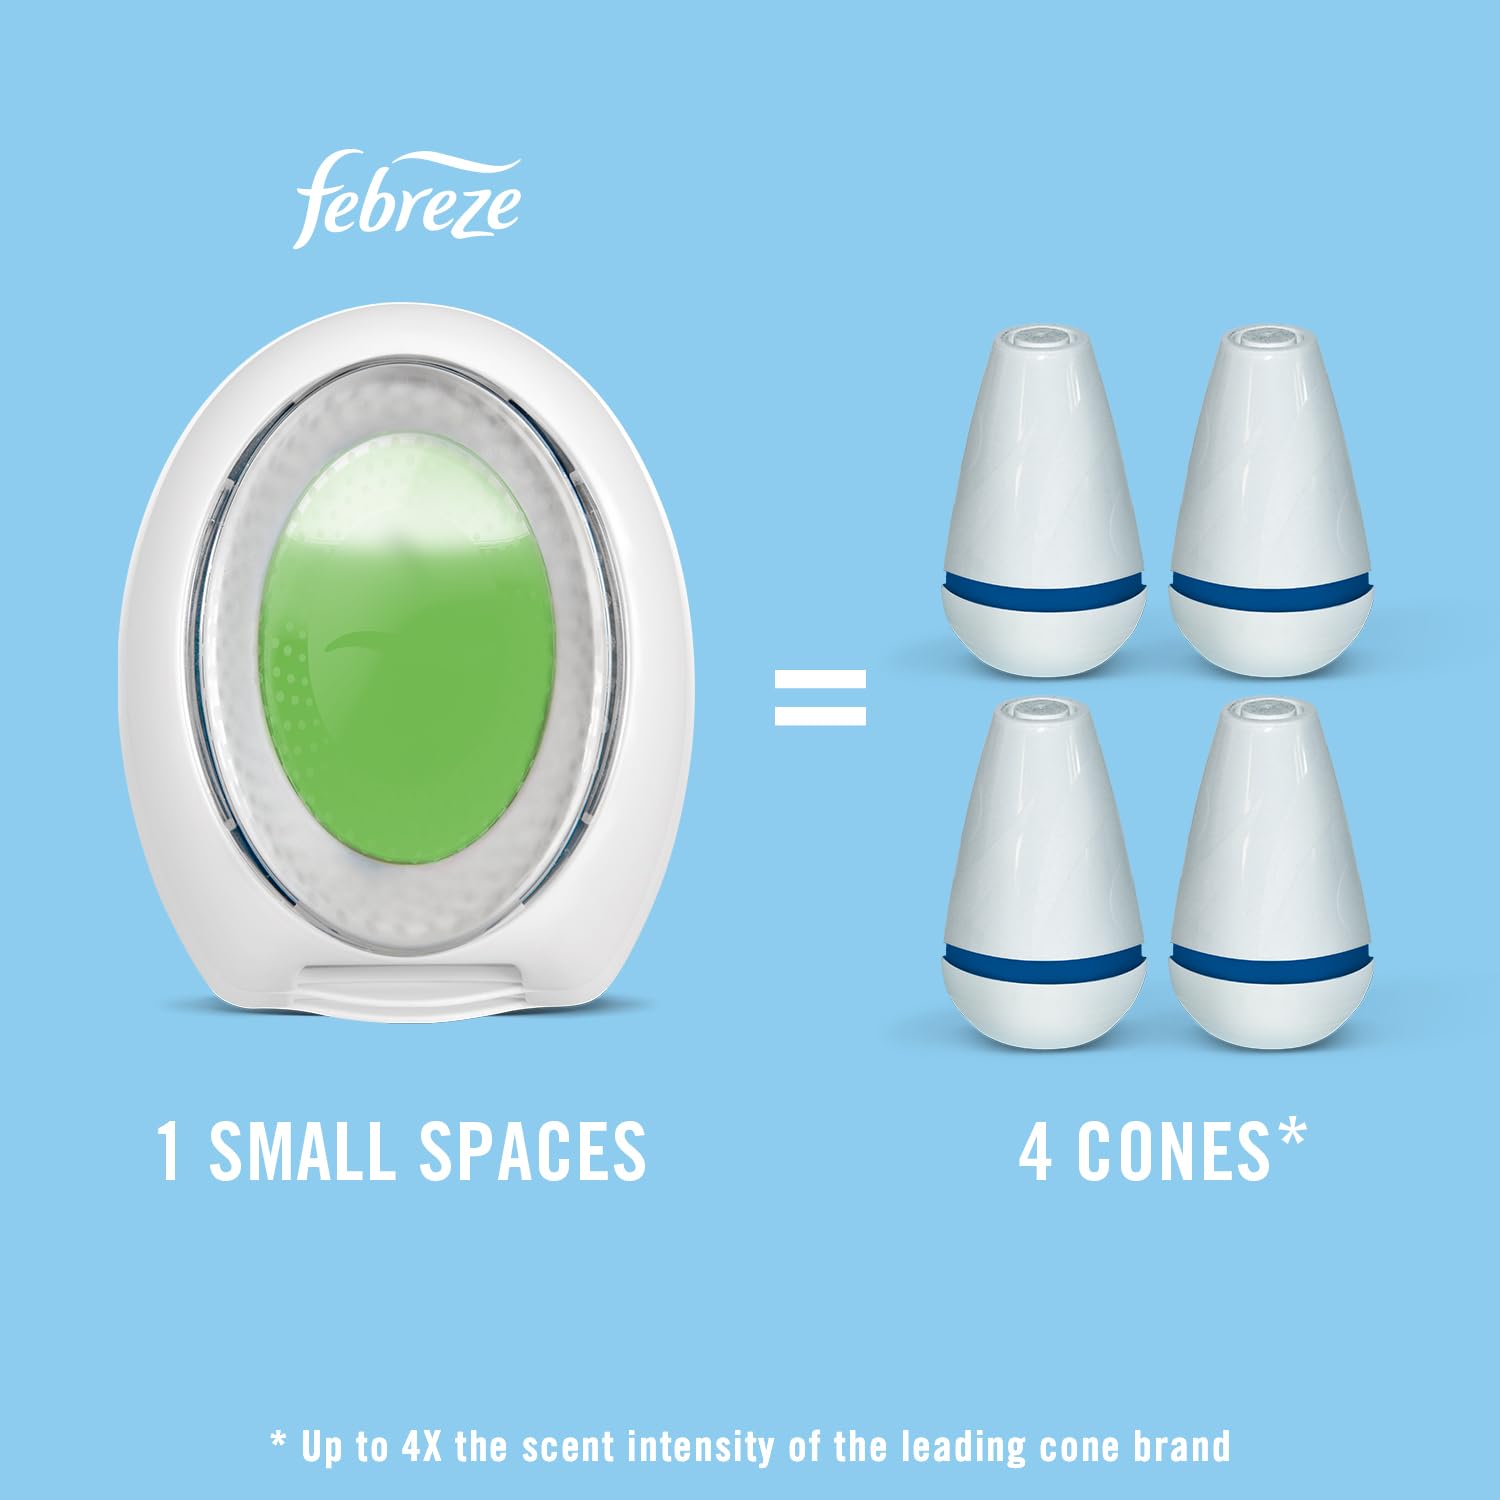 Febreze Small Spaces, Plug in Air Freshener Alternative for Home, Heavy Duty Lemon Scent, Odor Eliminator for Strong Odor (4 Count)